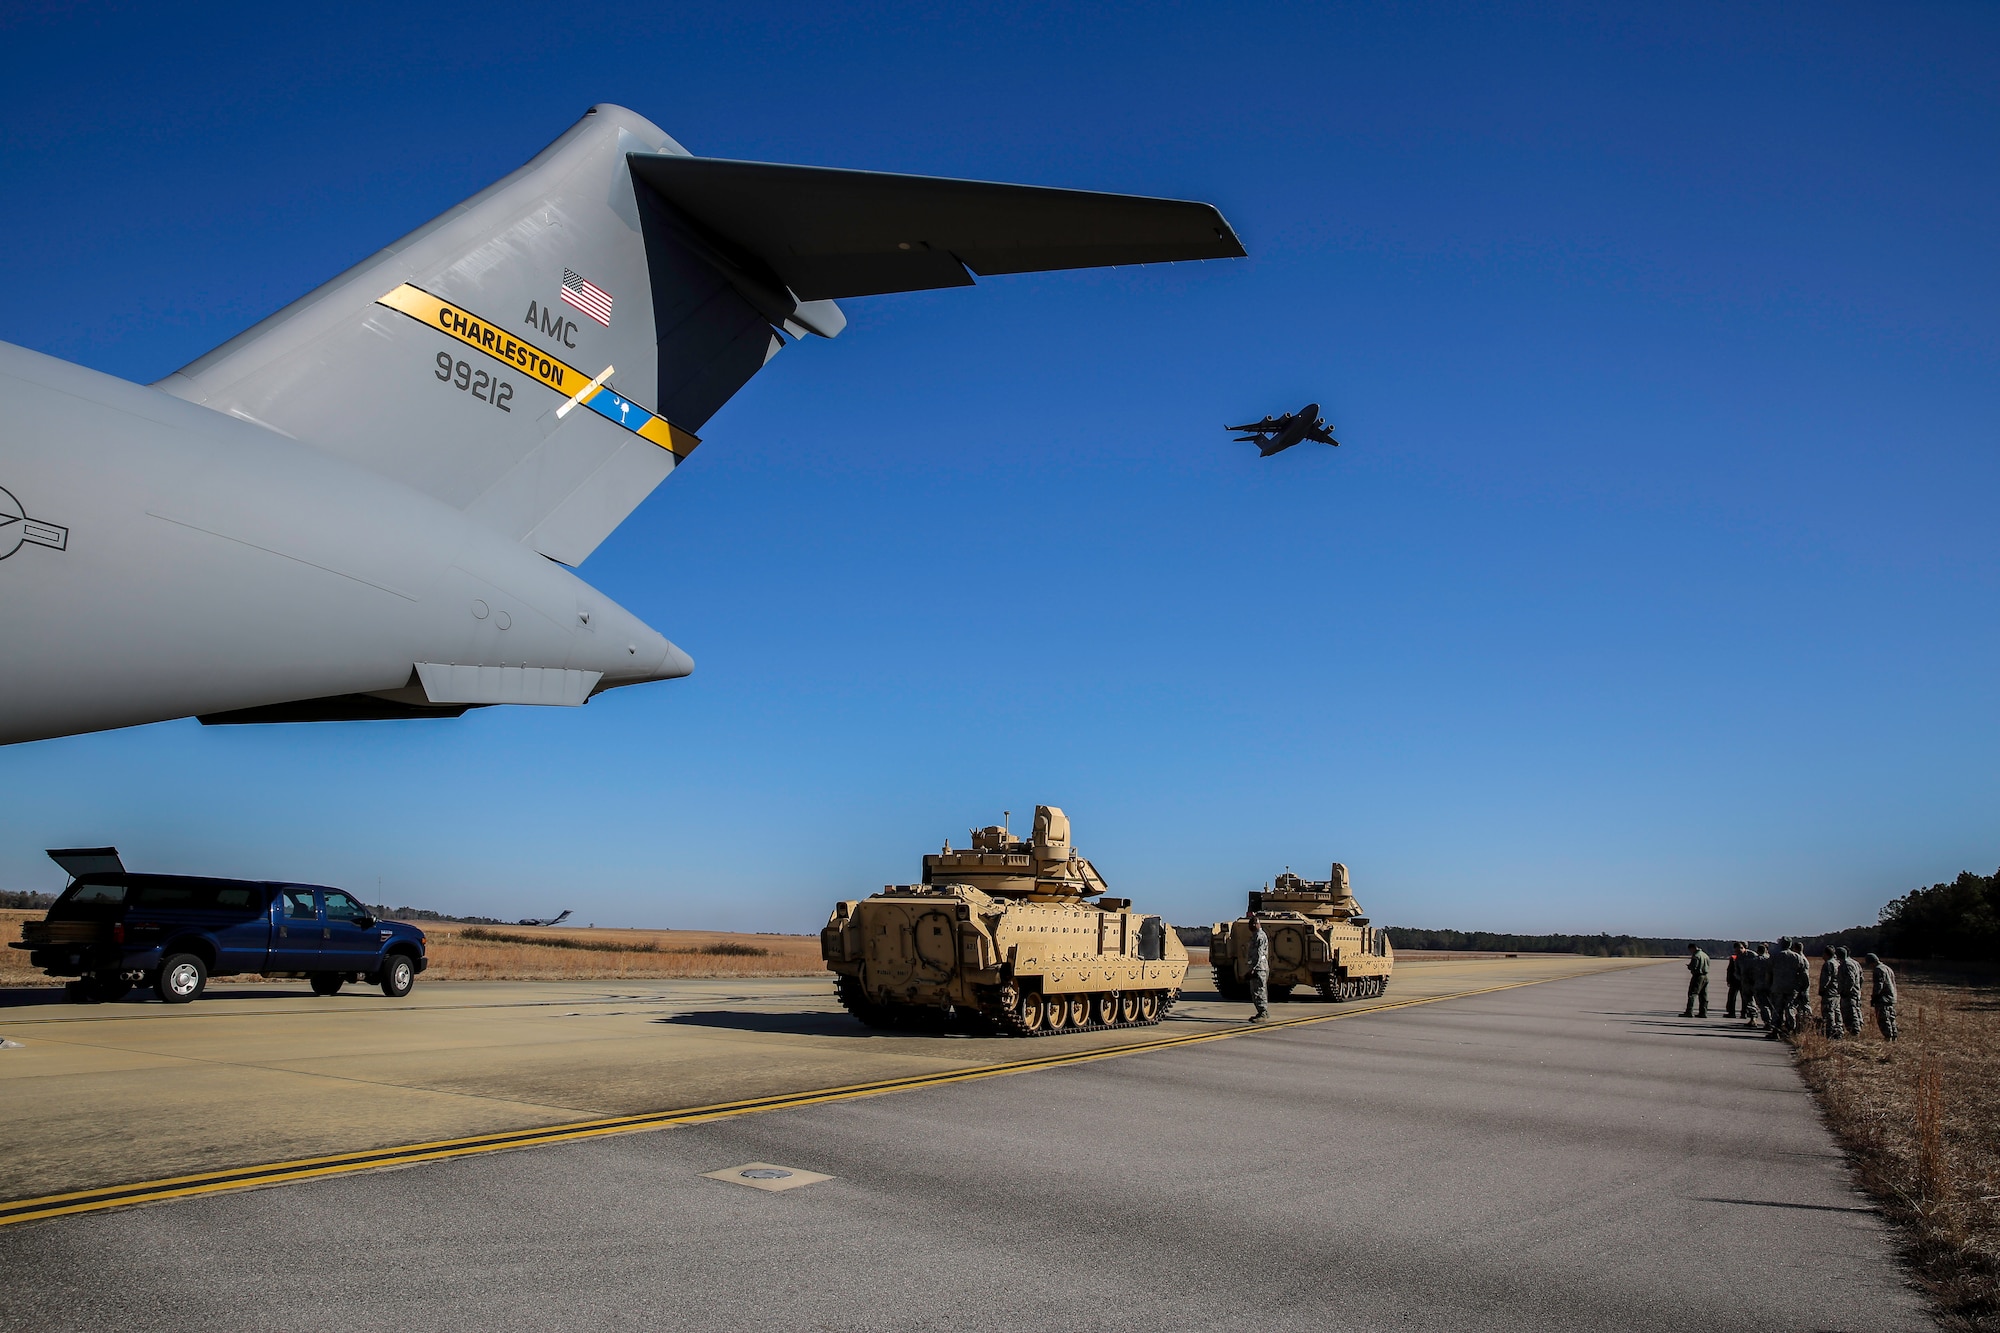 Two M2A3 Bradley Fighting Vehicles await the arrival of another C-17 Globemaster III at North Air Force Auxiliary Field Dec. 11, 2014 for redeployment to Savannah, Ga.  The vehicles were used as cargo during a two-day exercise which integrated C-17 air and ground crew training for 315th Airlift Wing Airmen stationed at Joint Base Charleston, S.C. as well as Soldiers from one of the 3rd Infantry Division’s Immediate Ready Companies stationed at Fort Stewart, Ga. Four C-17’s were used during the exercise to deploy and redeploy the fighting vehicles, two Abrams M1A2 tanks and an M88 recovery. (U.S. Air Force photo by Tech. Sgt. Shane Ellis)